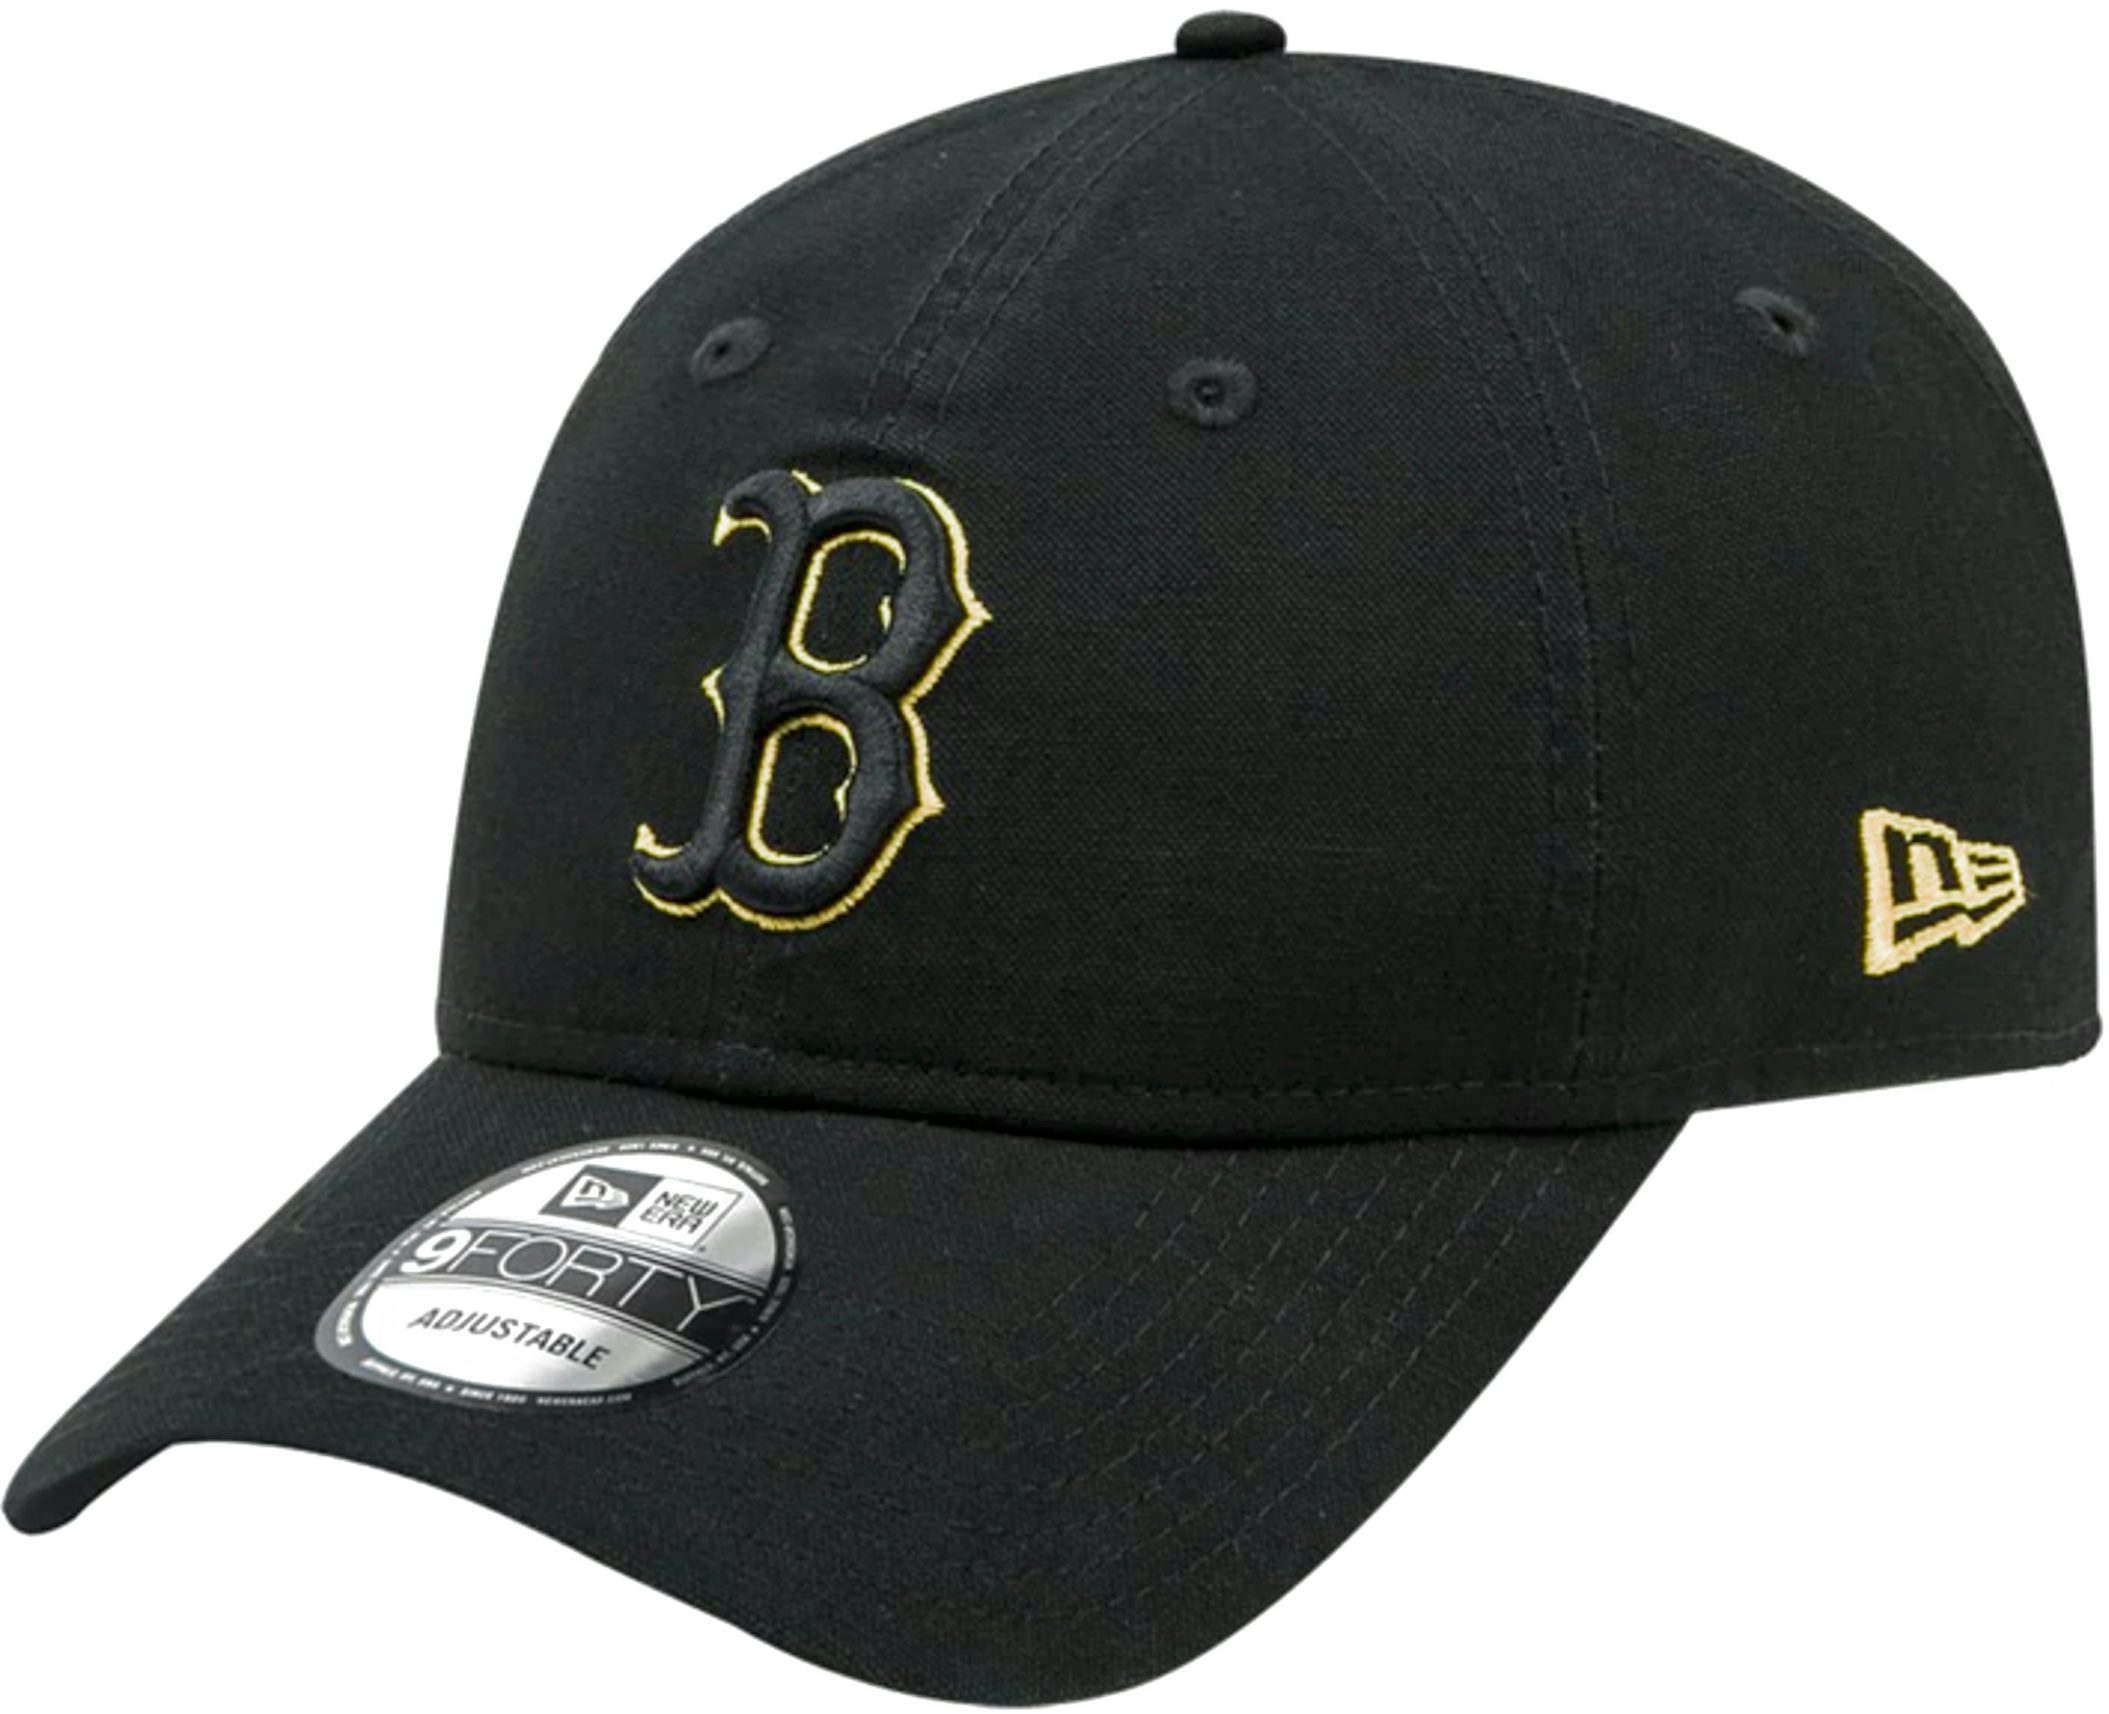 New Era 59Fifty MLB Boston Red Sox Black on Black Fitted Cap